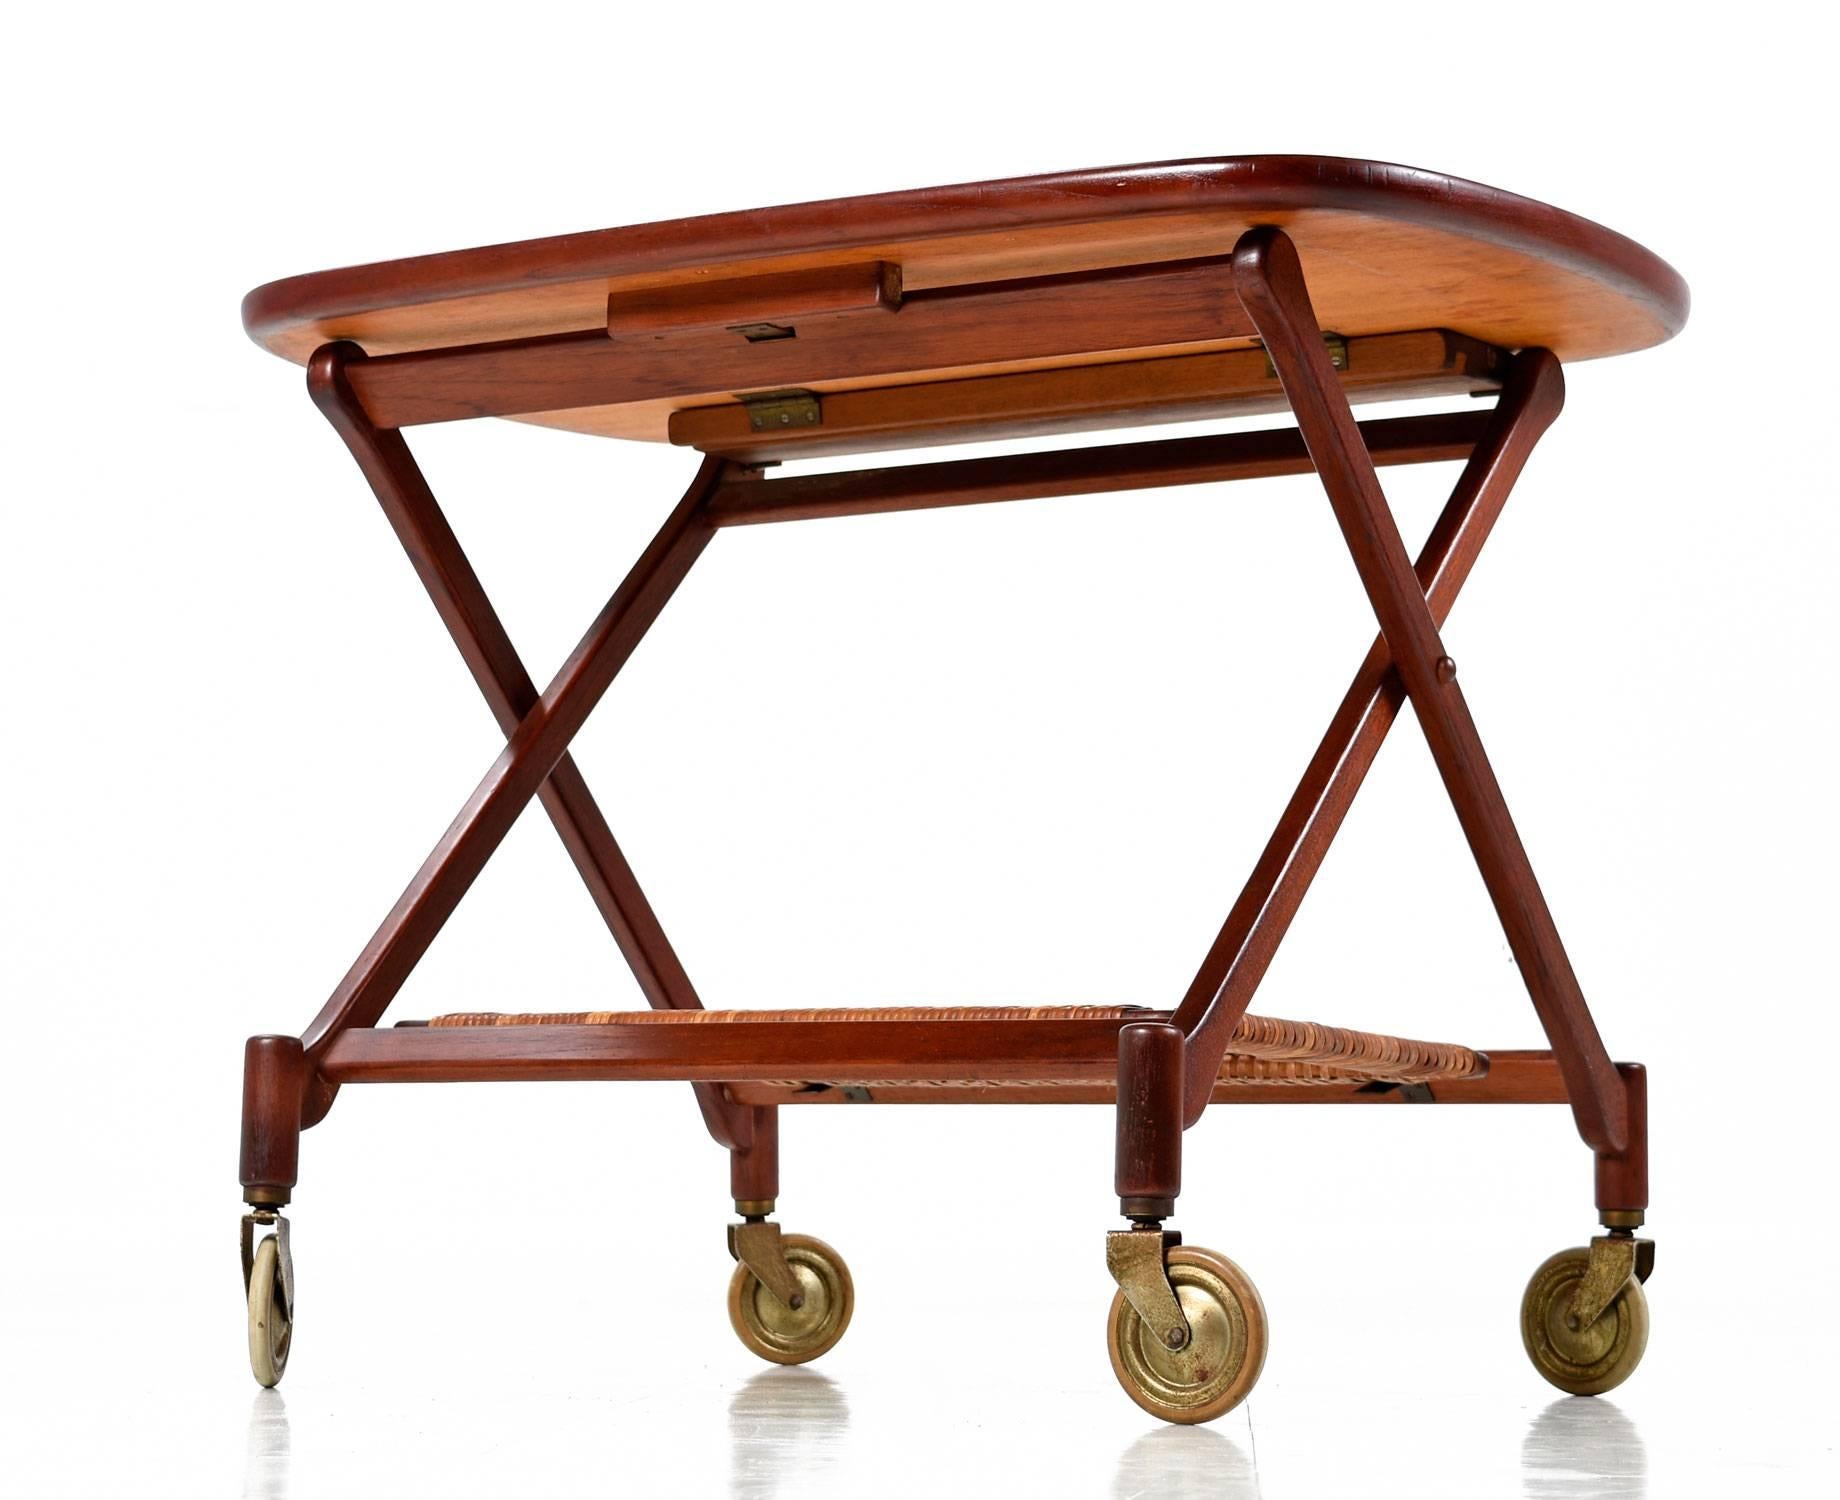 Poul Hundevad for Vamdrup folding teak bar cart. This early Scandinavian gem is a rare piece by noted designer Poul Hundevad. The lower level features a woven cane shelf. The oval tray has an elevated lip surrounding the perimeter. The cart is